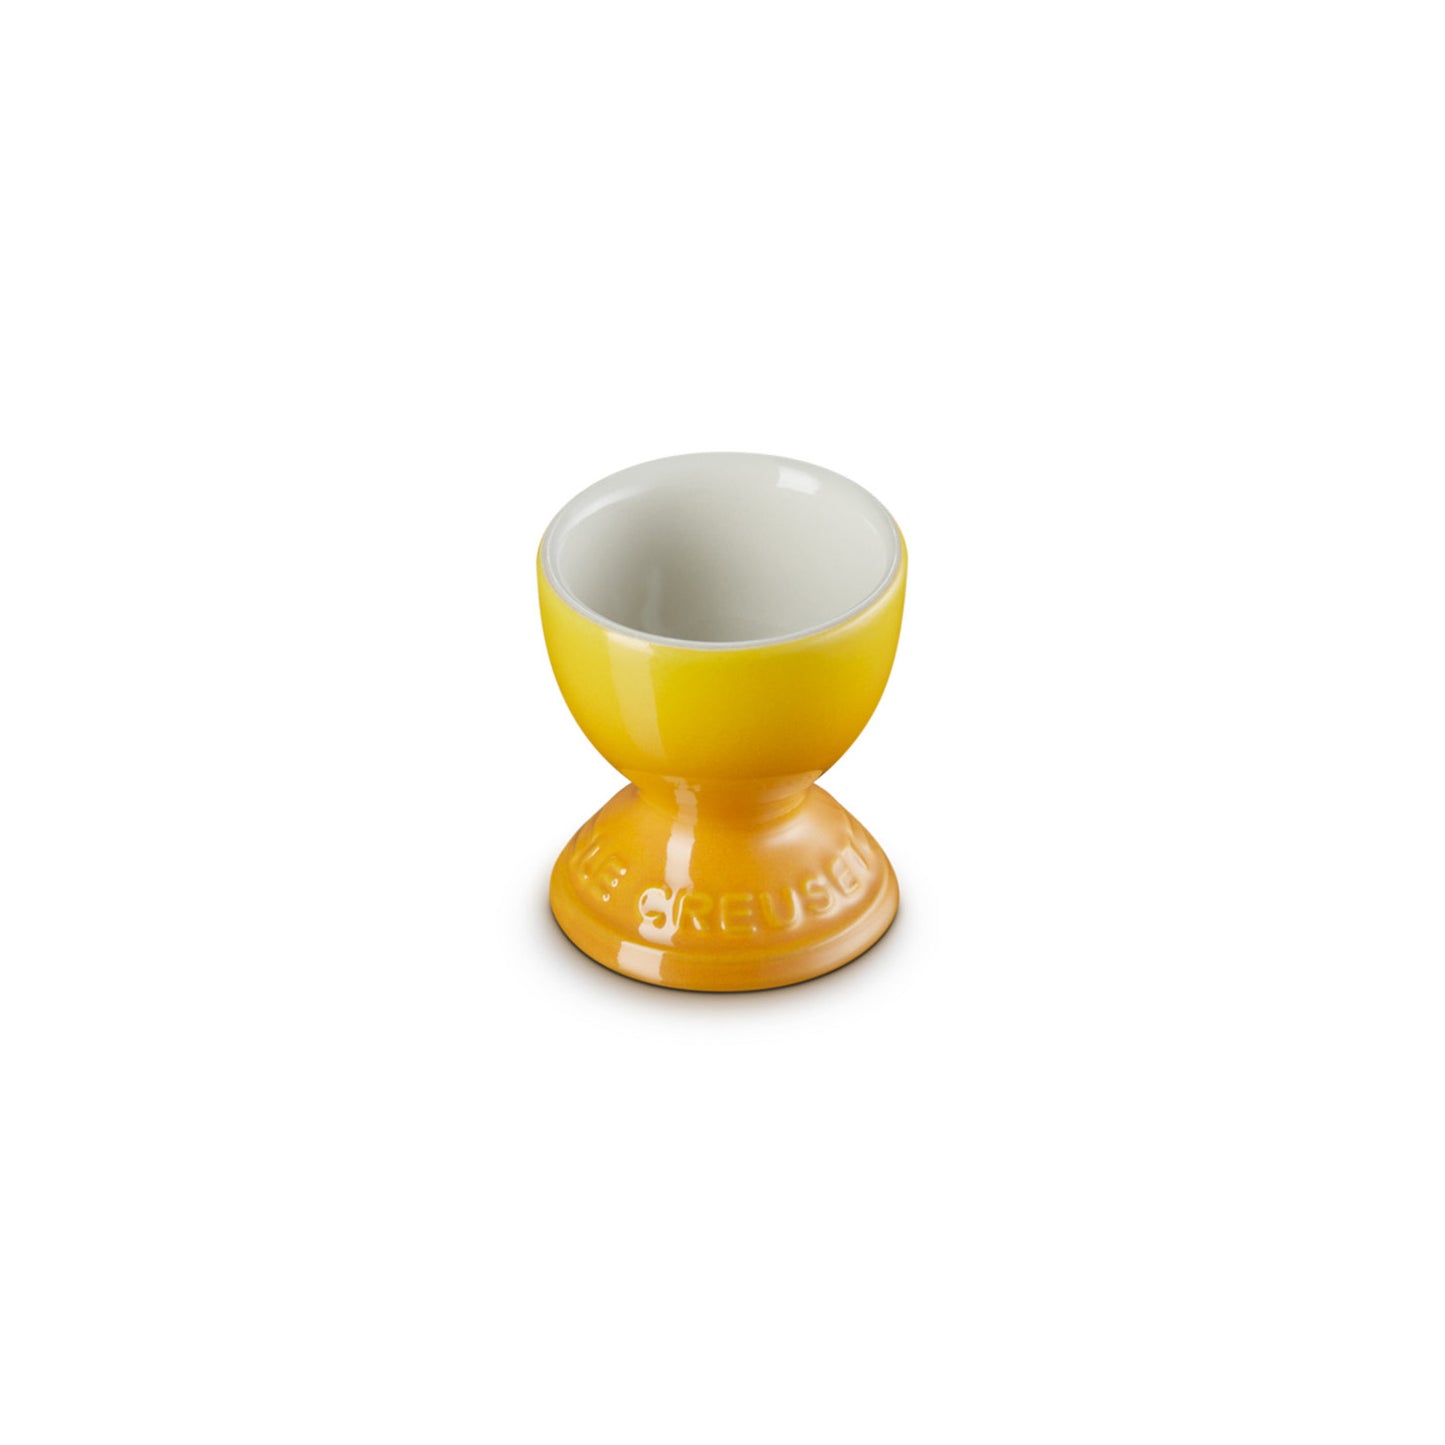 Le Creuset Stoneware Egg Cup in Nectar